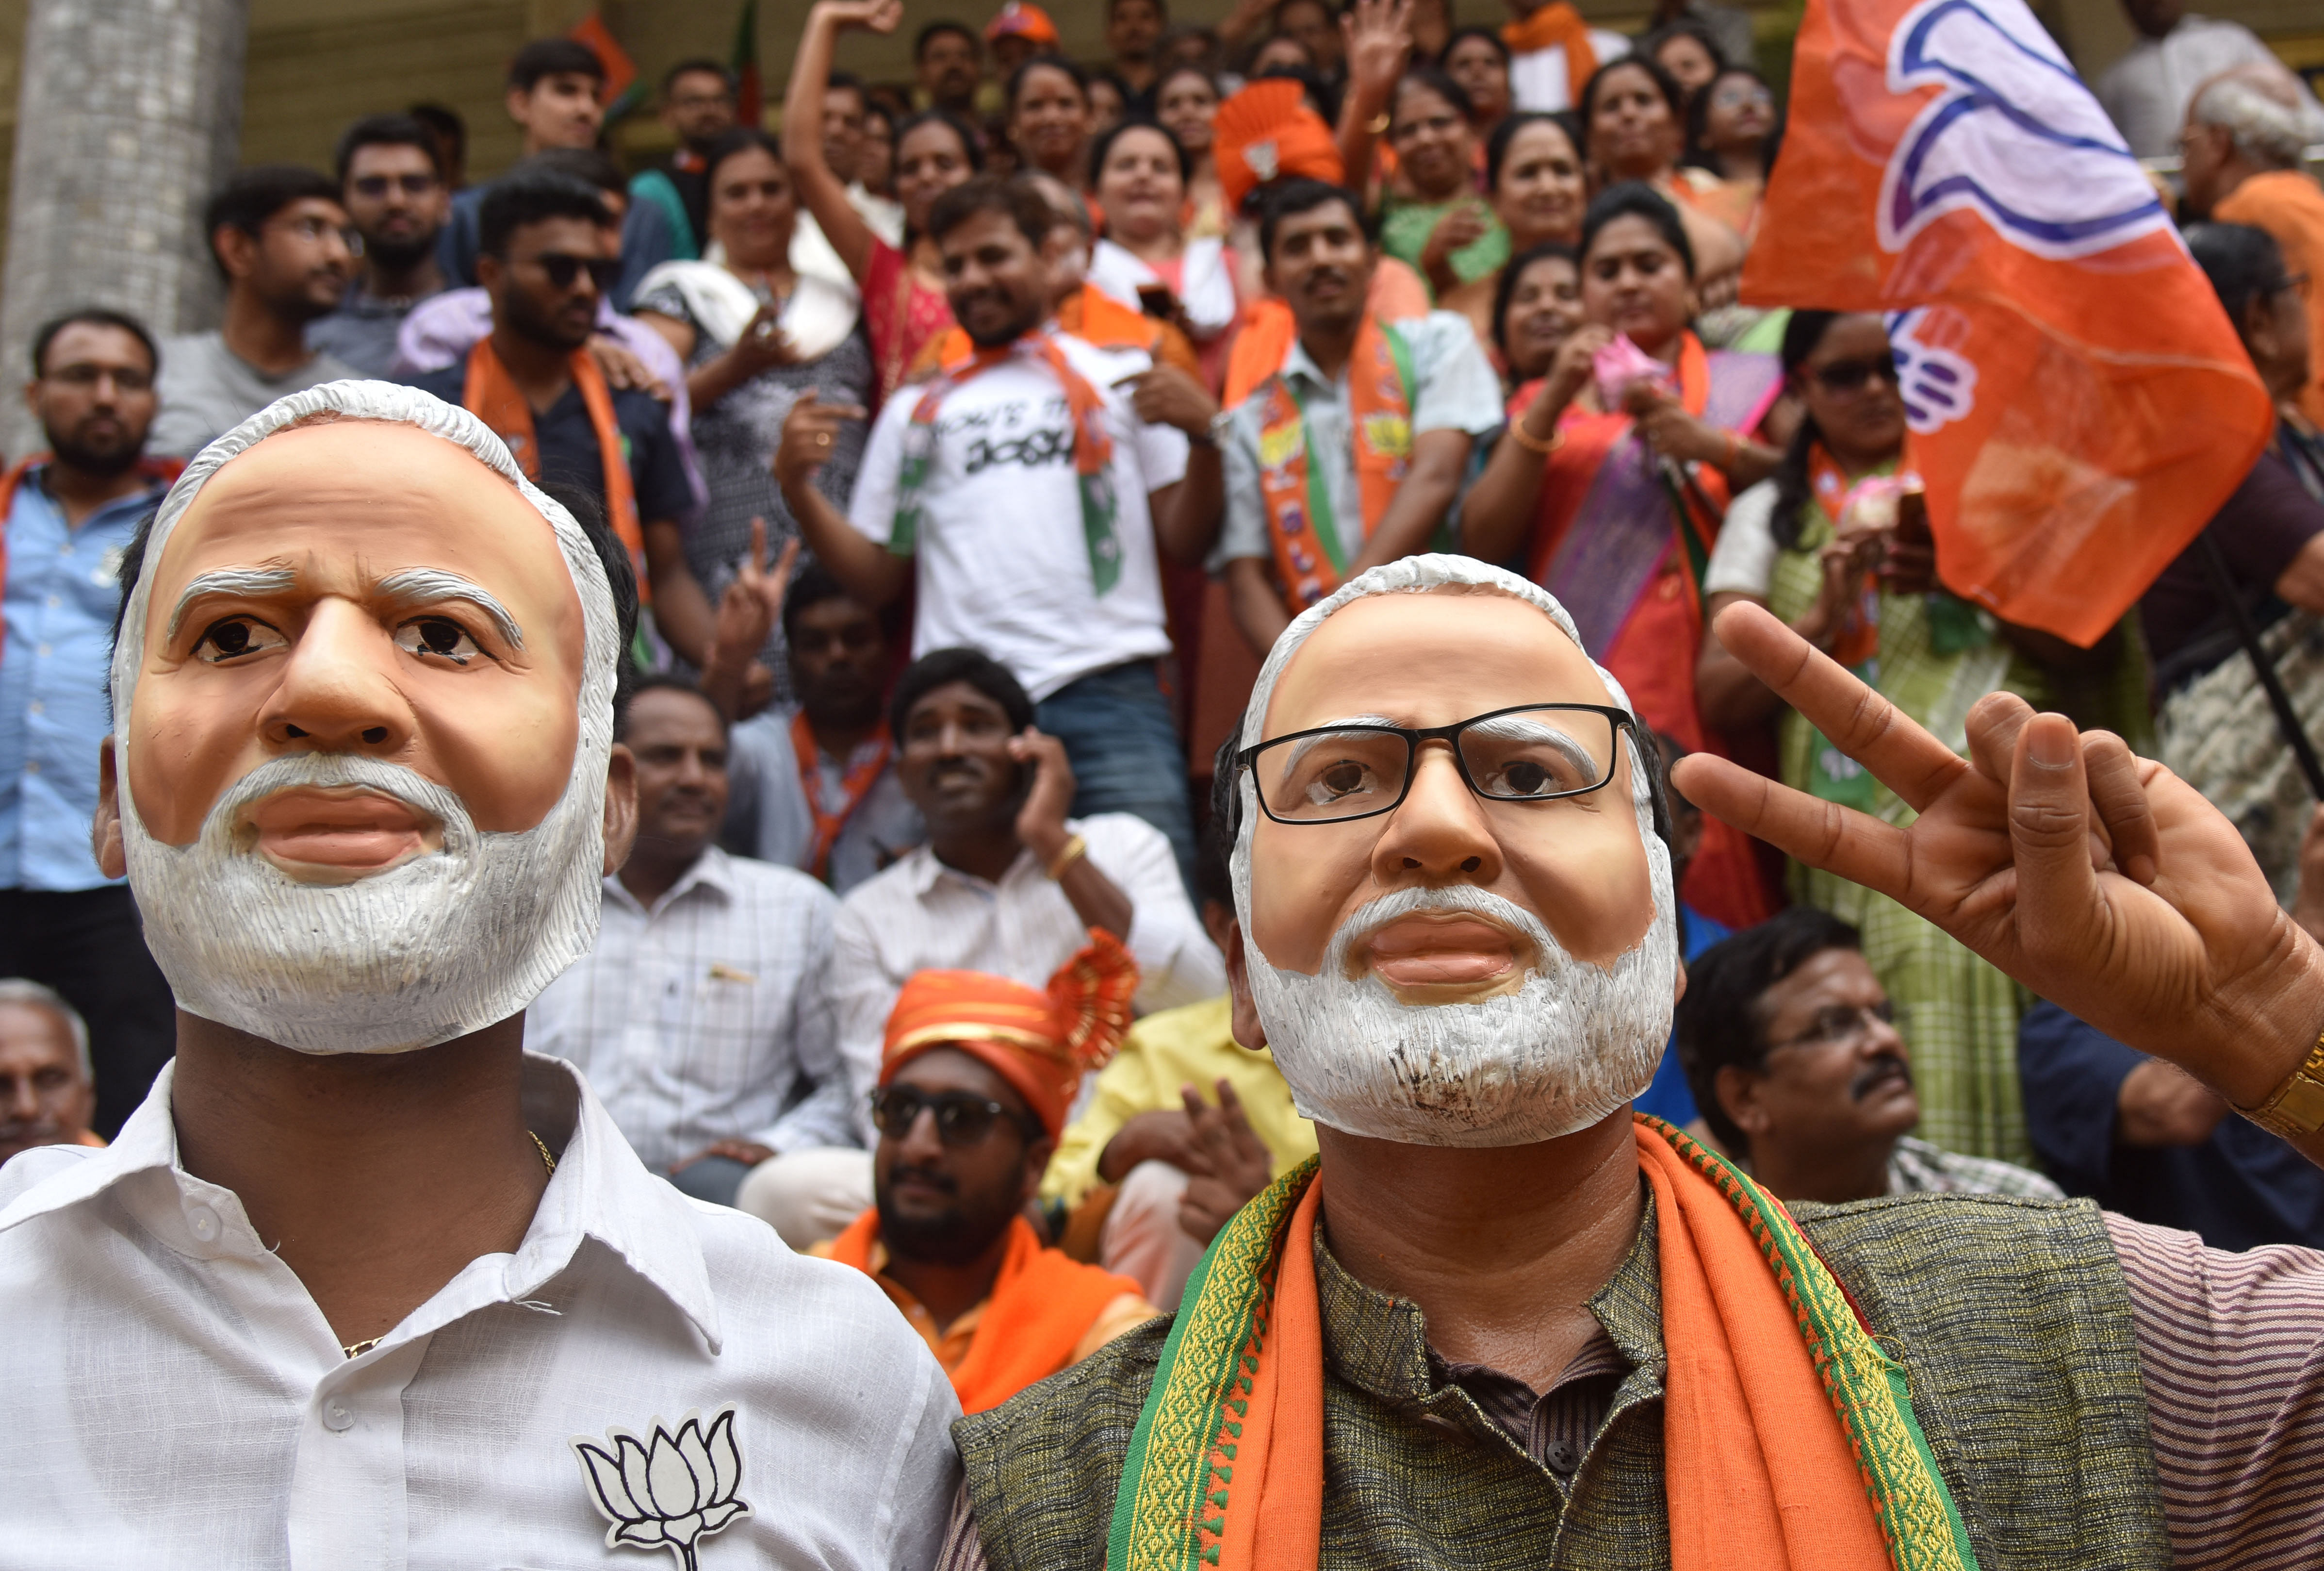 BJP party workers celebrating in front of State party office at Malleswara in Bengaluru on Thursday, 23 May, 2019. Photo by Janardhan B K